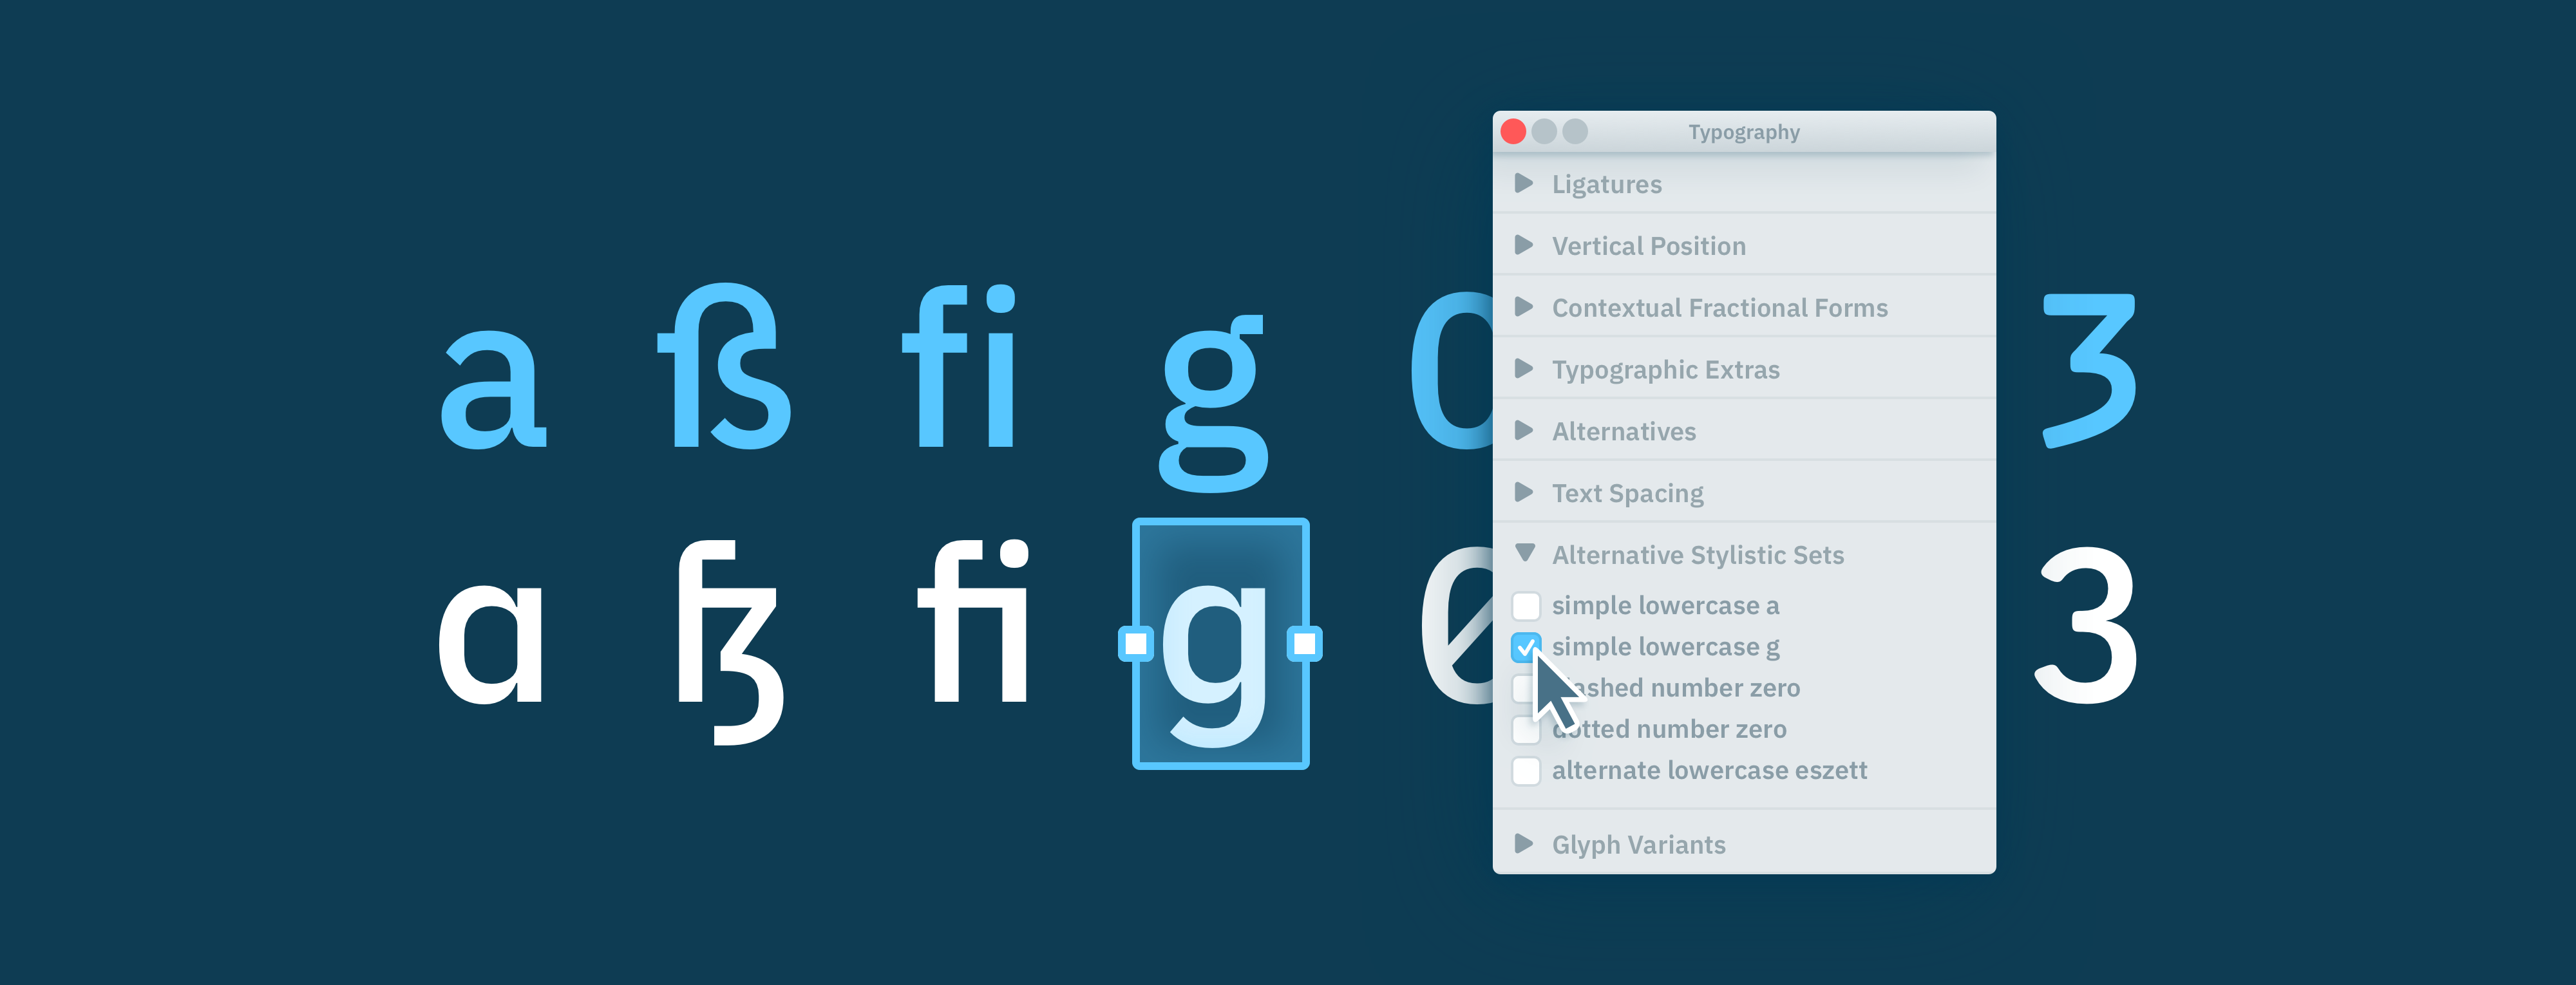 Advanced typographic features in sketch